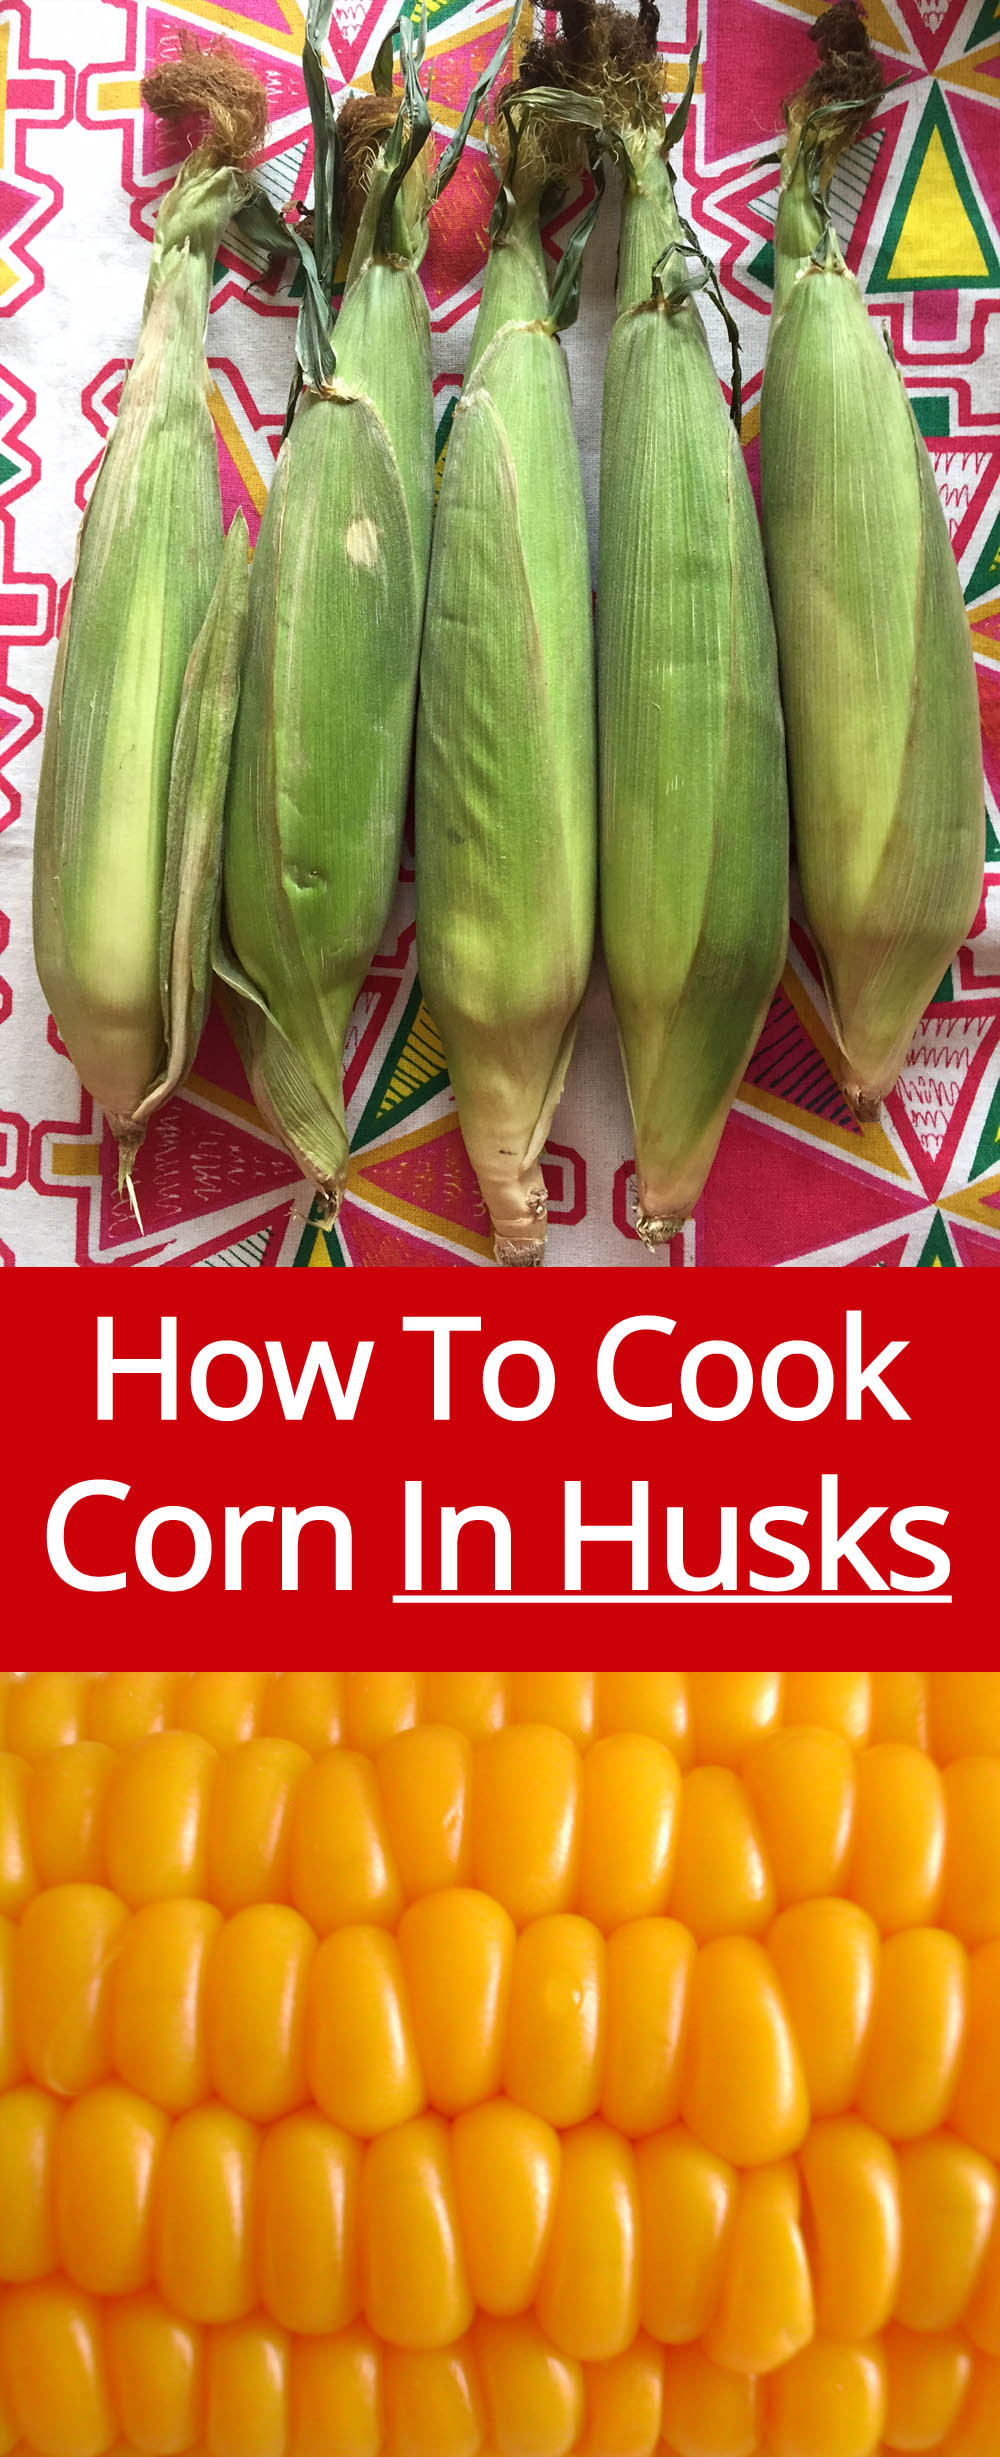 Microwave Corn On The Cob Wax Paper
 how long cook corn on cob in microwave